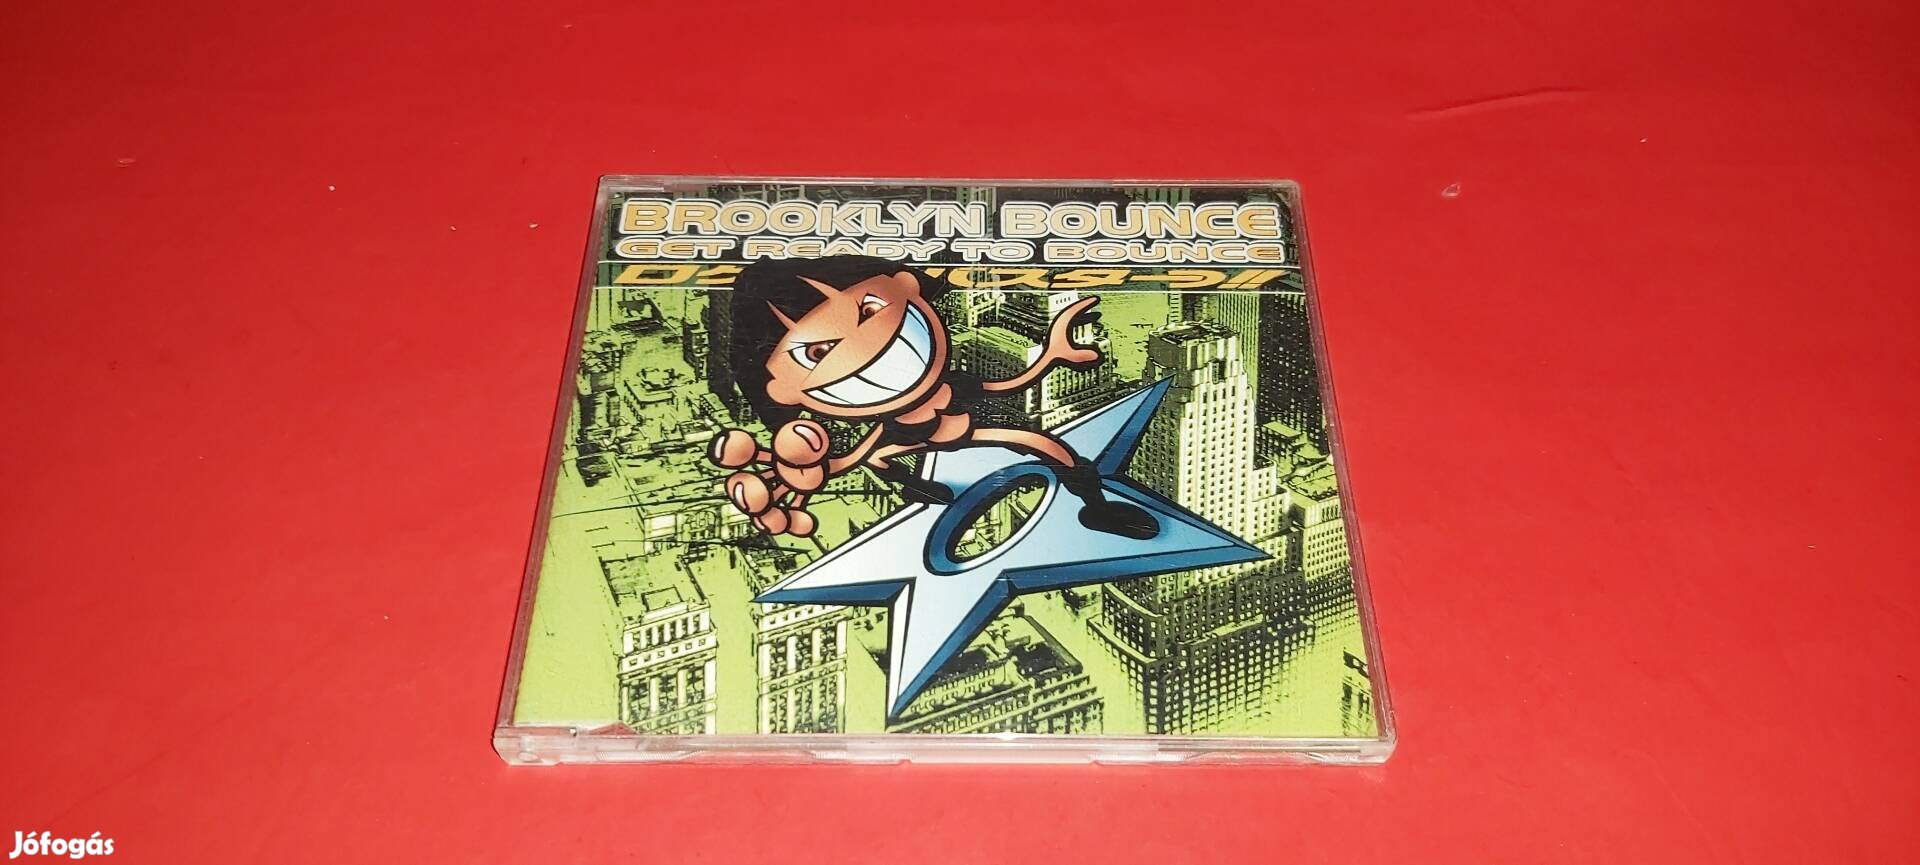 Brooklyn Bounce Get ready to bonce maxi Cd 1997